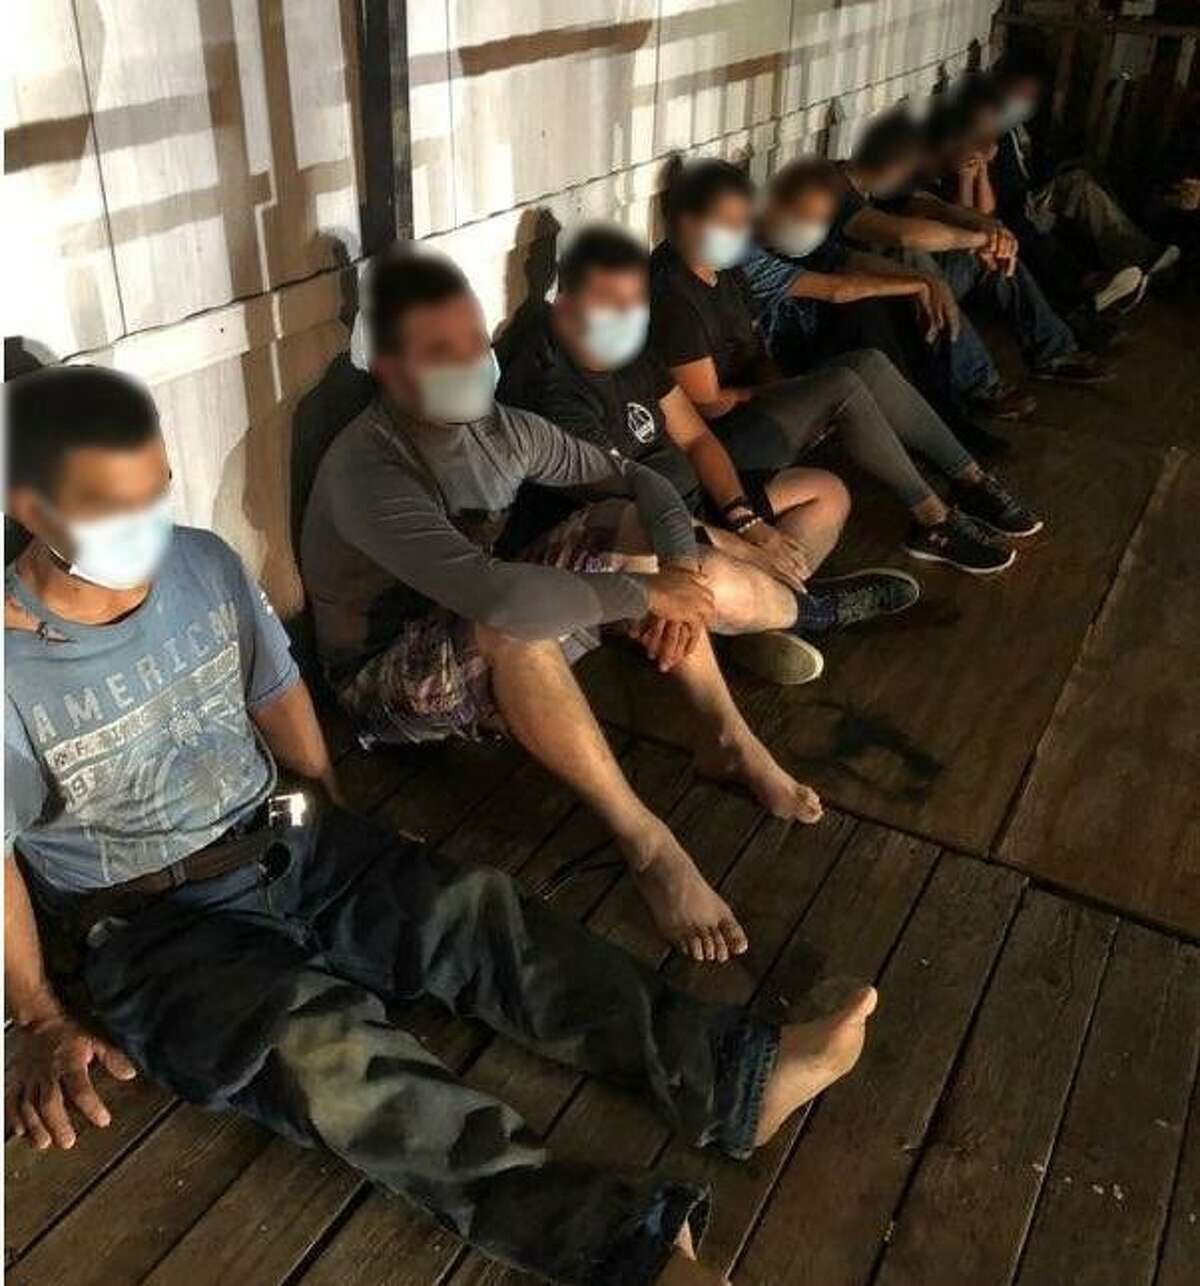 U.S. Border Patrol agents said this group of people were found inside a stash house in Zapata County. All were determined to be immigrants who were illegally present in the country.